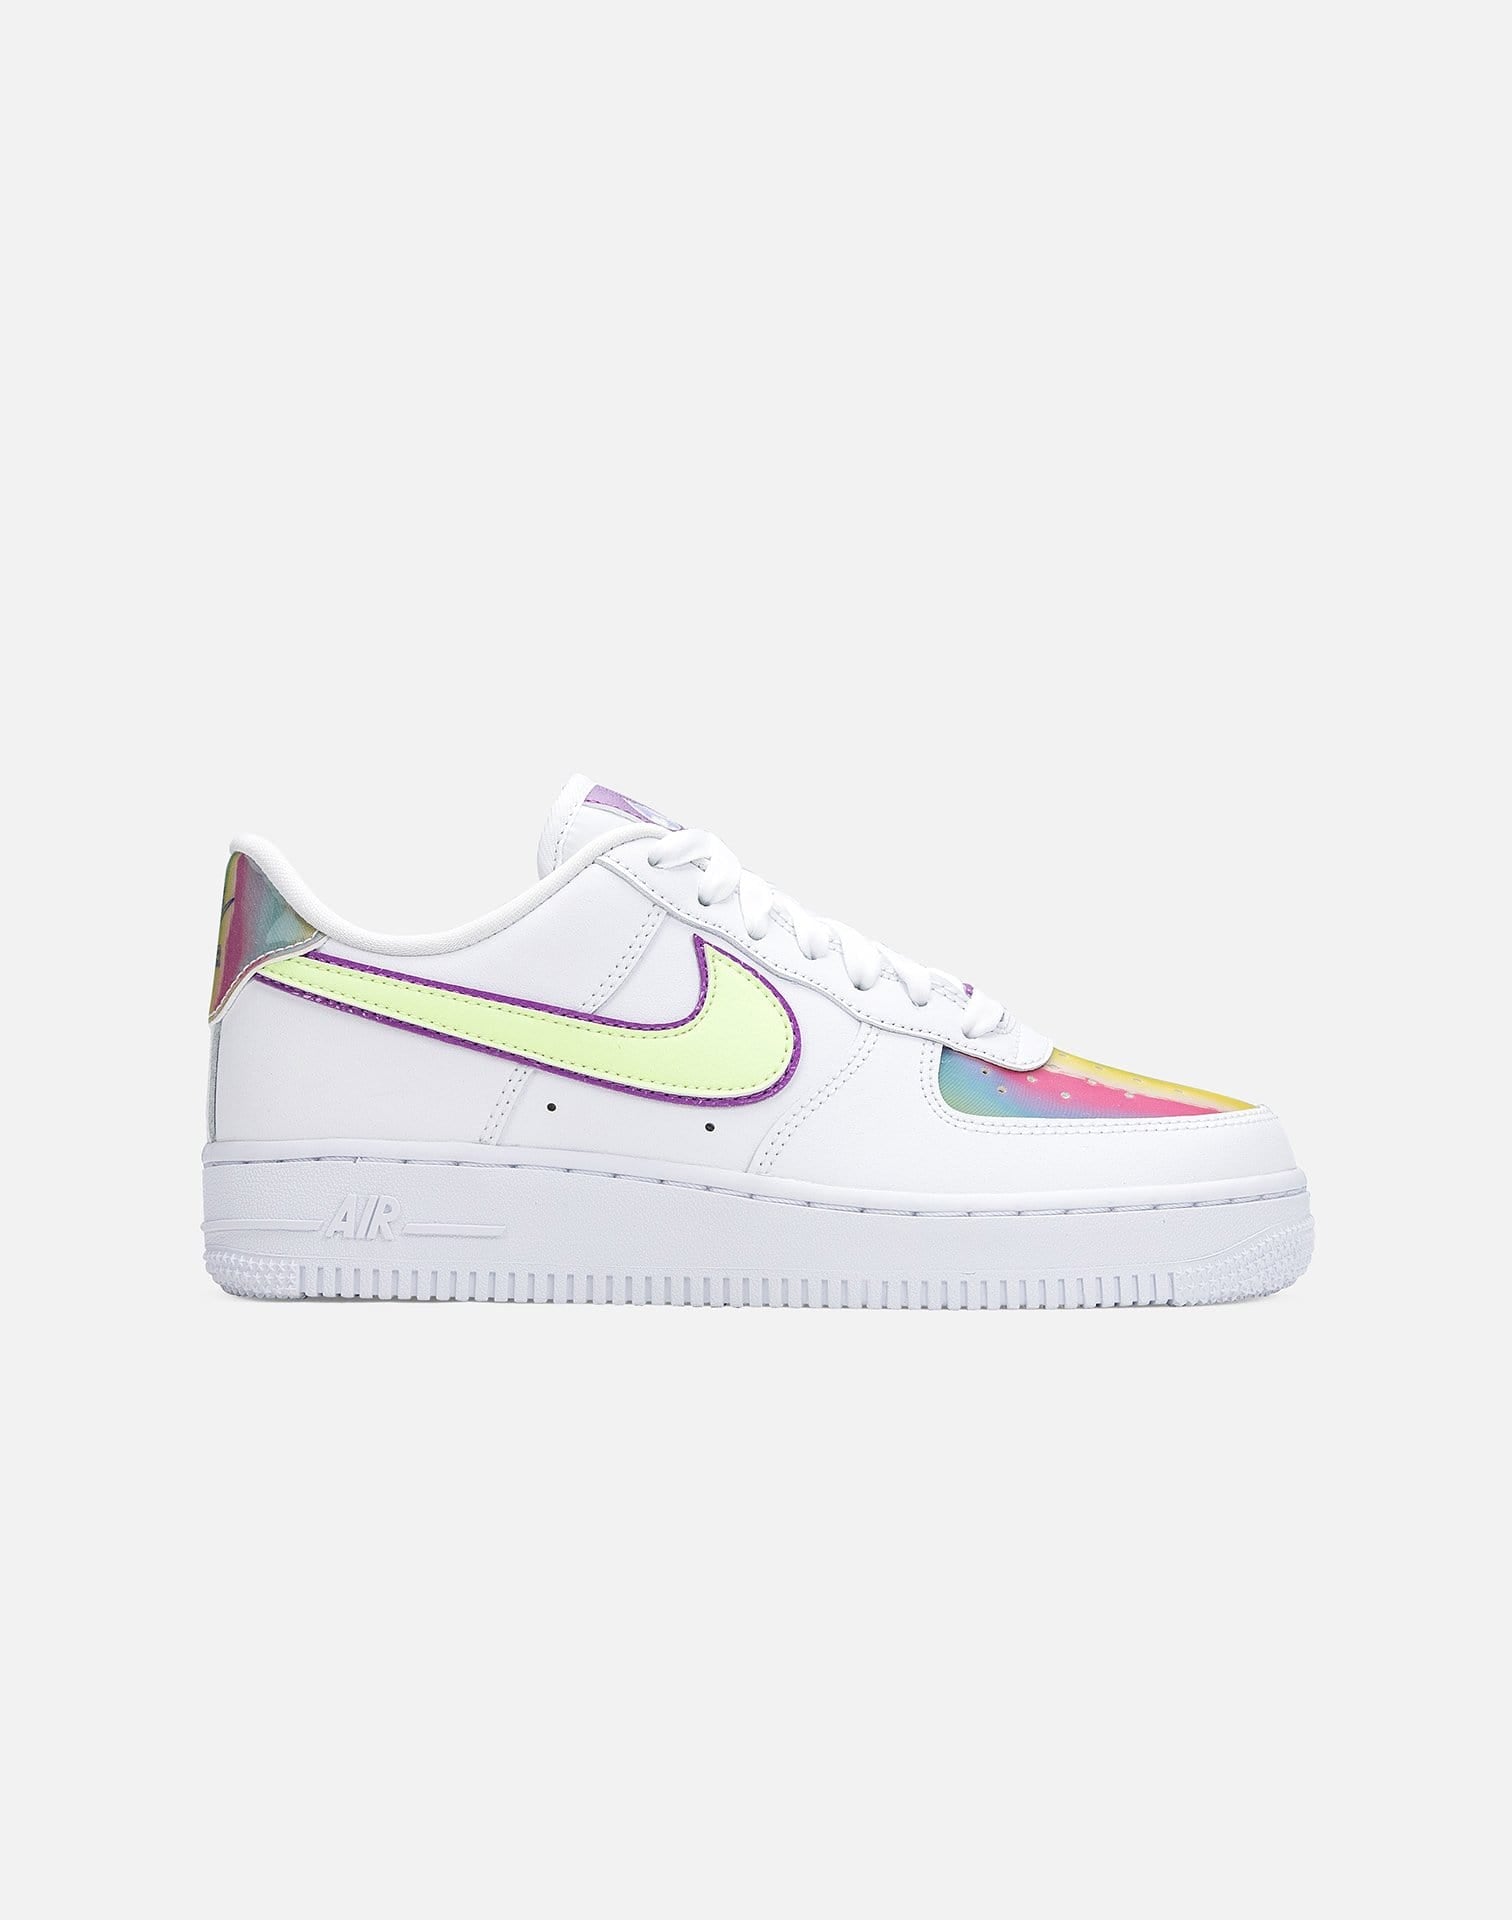 WMNS AIR FORCE 1 '07 LOW 'EASTER' – DTLR